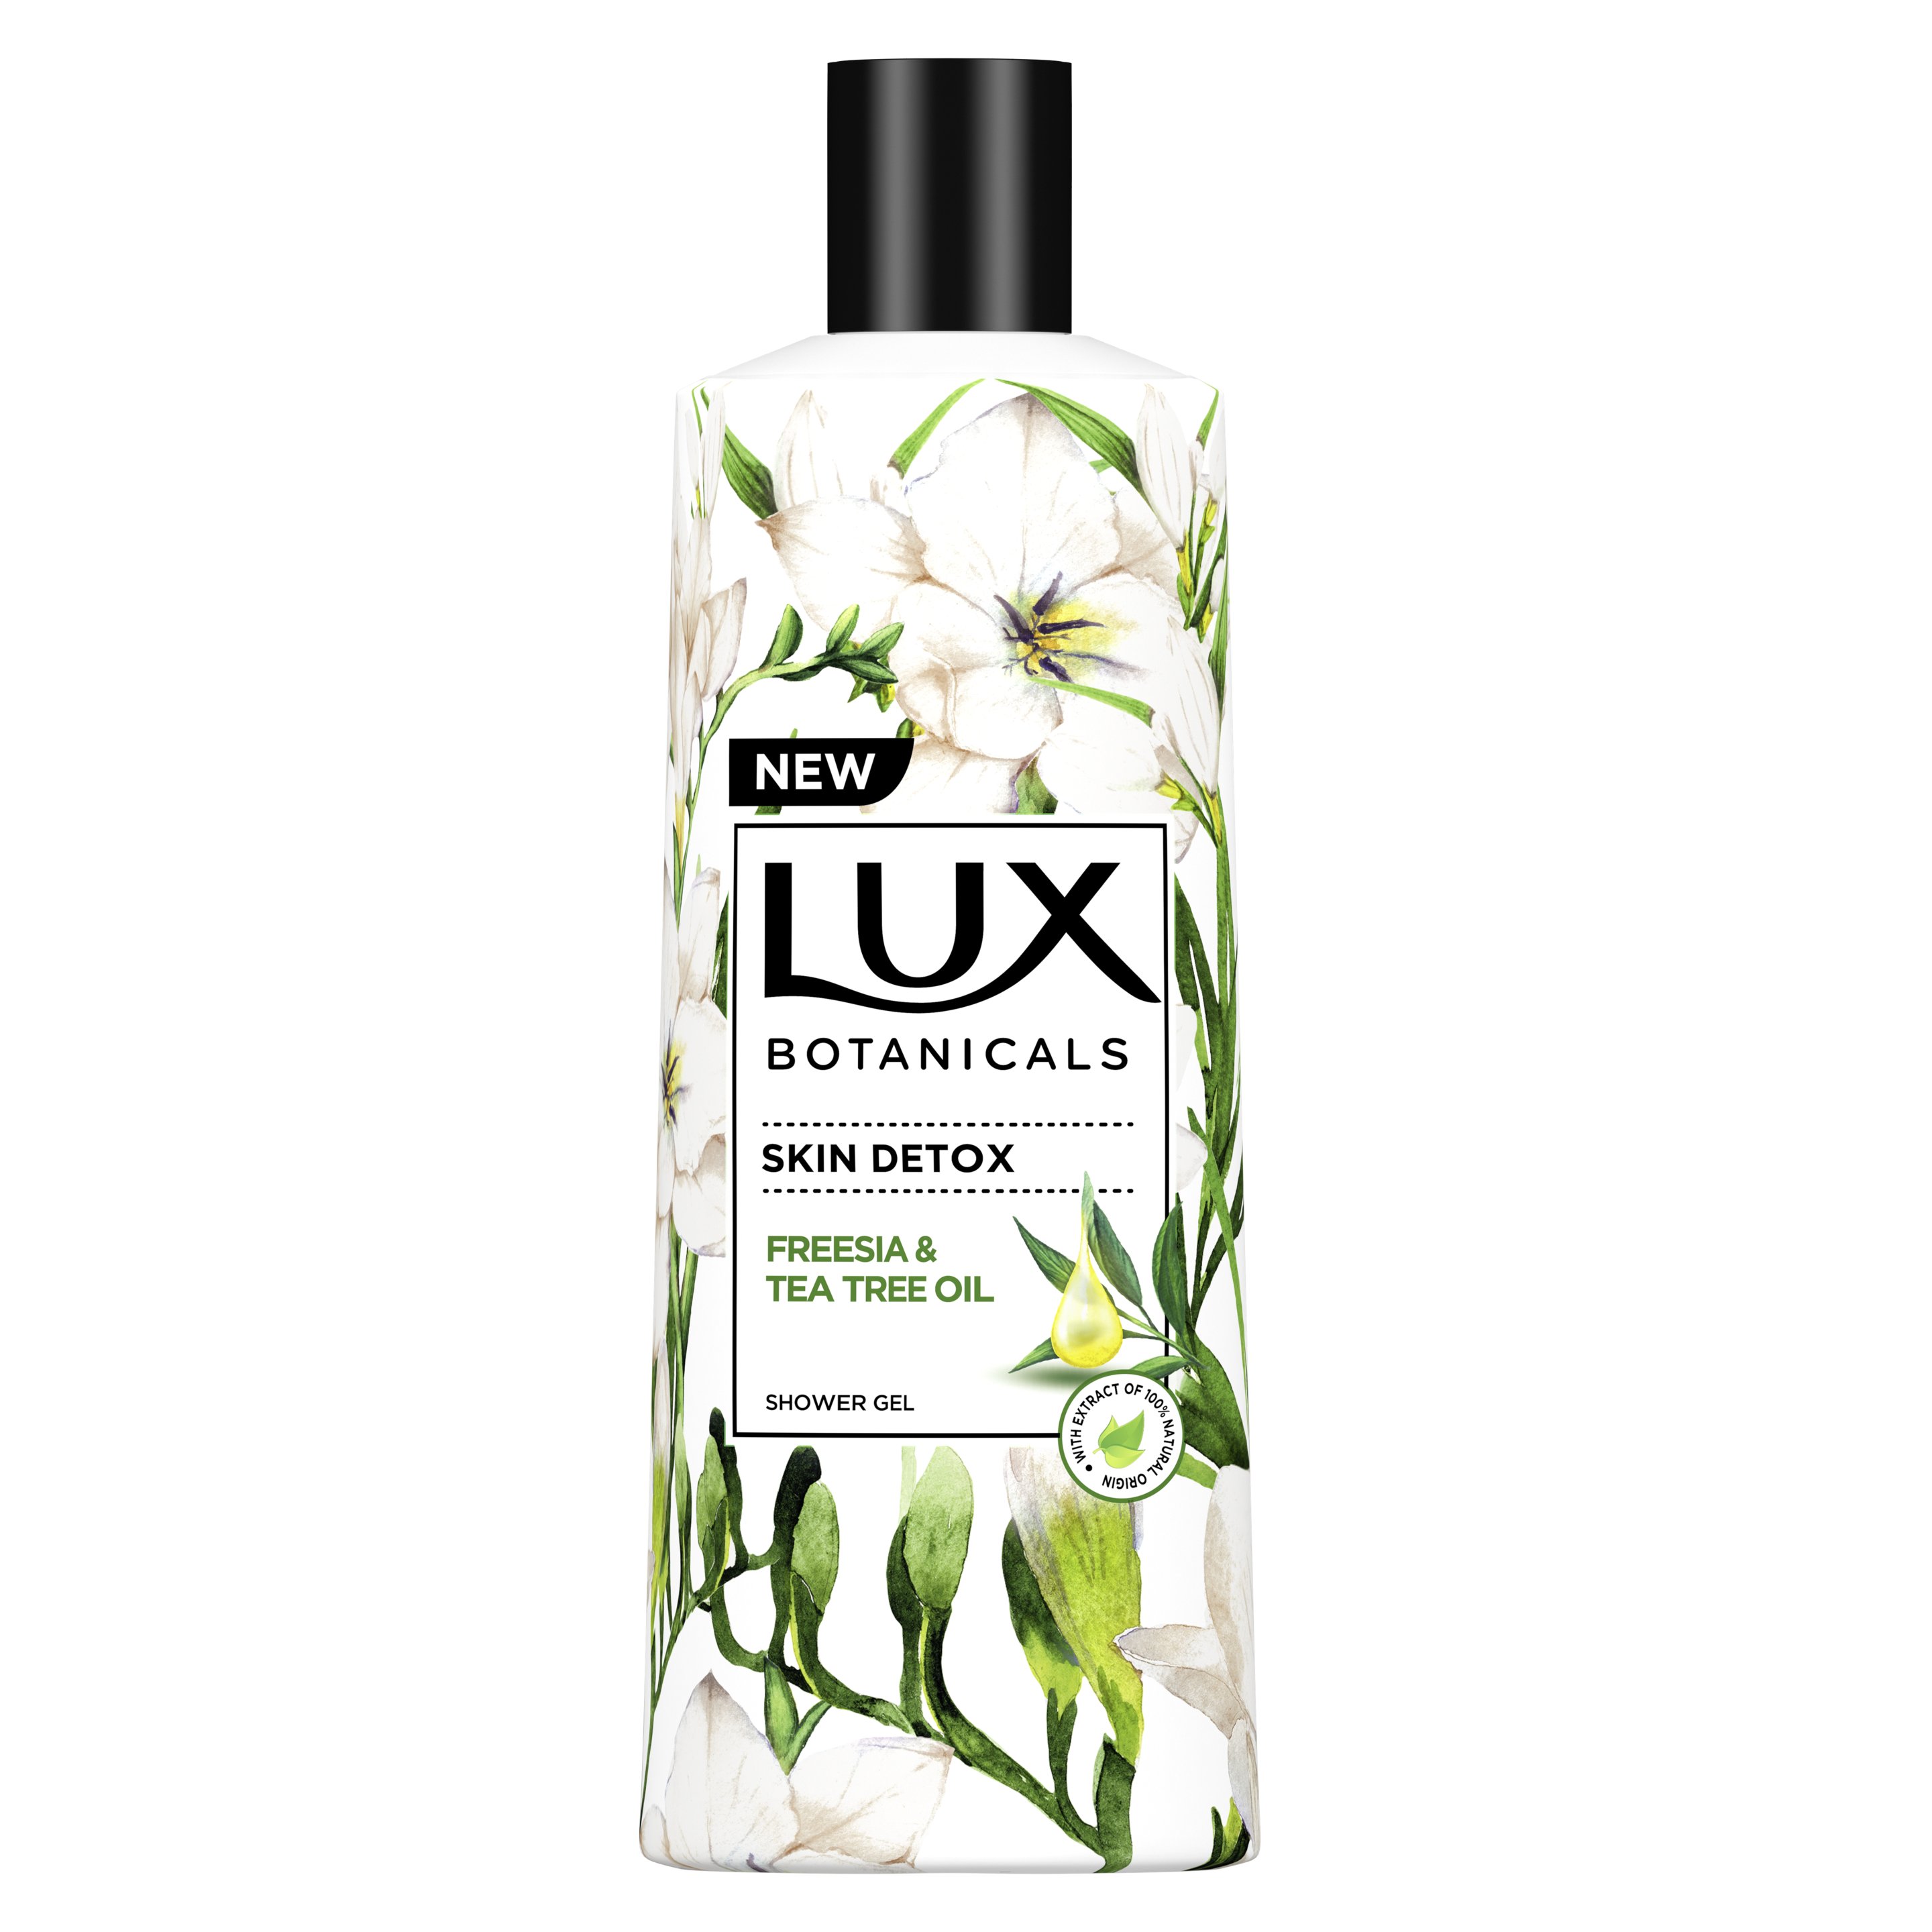 Lux Body Wash Shower Cream With Rose & Almond Oil - 245 ML